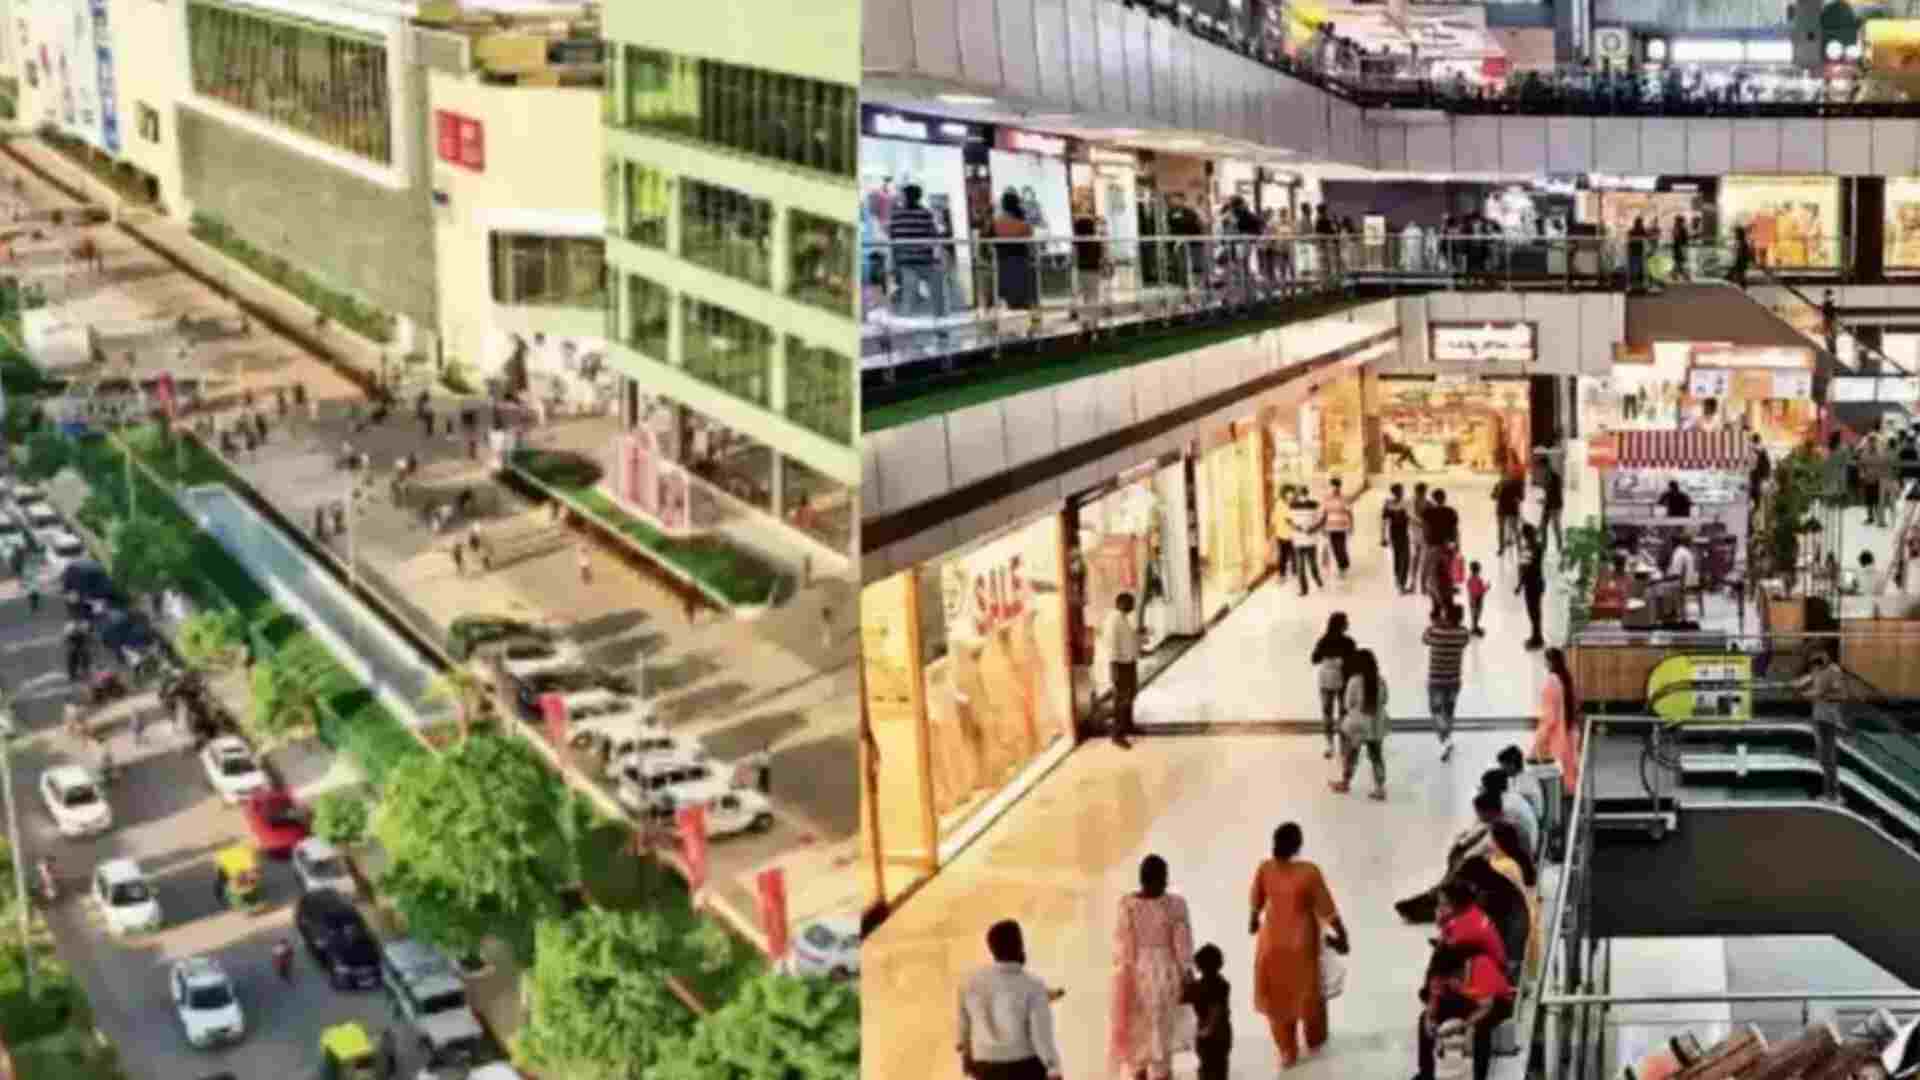 Aerocity at IGIA to Host India’s Largest Mall in $2.5 Billion Expansion